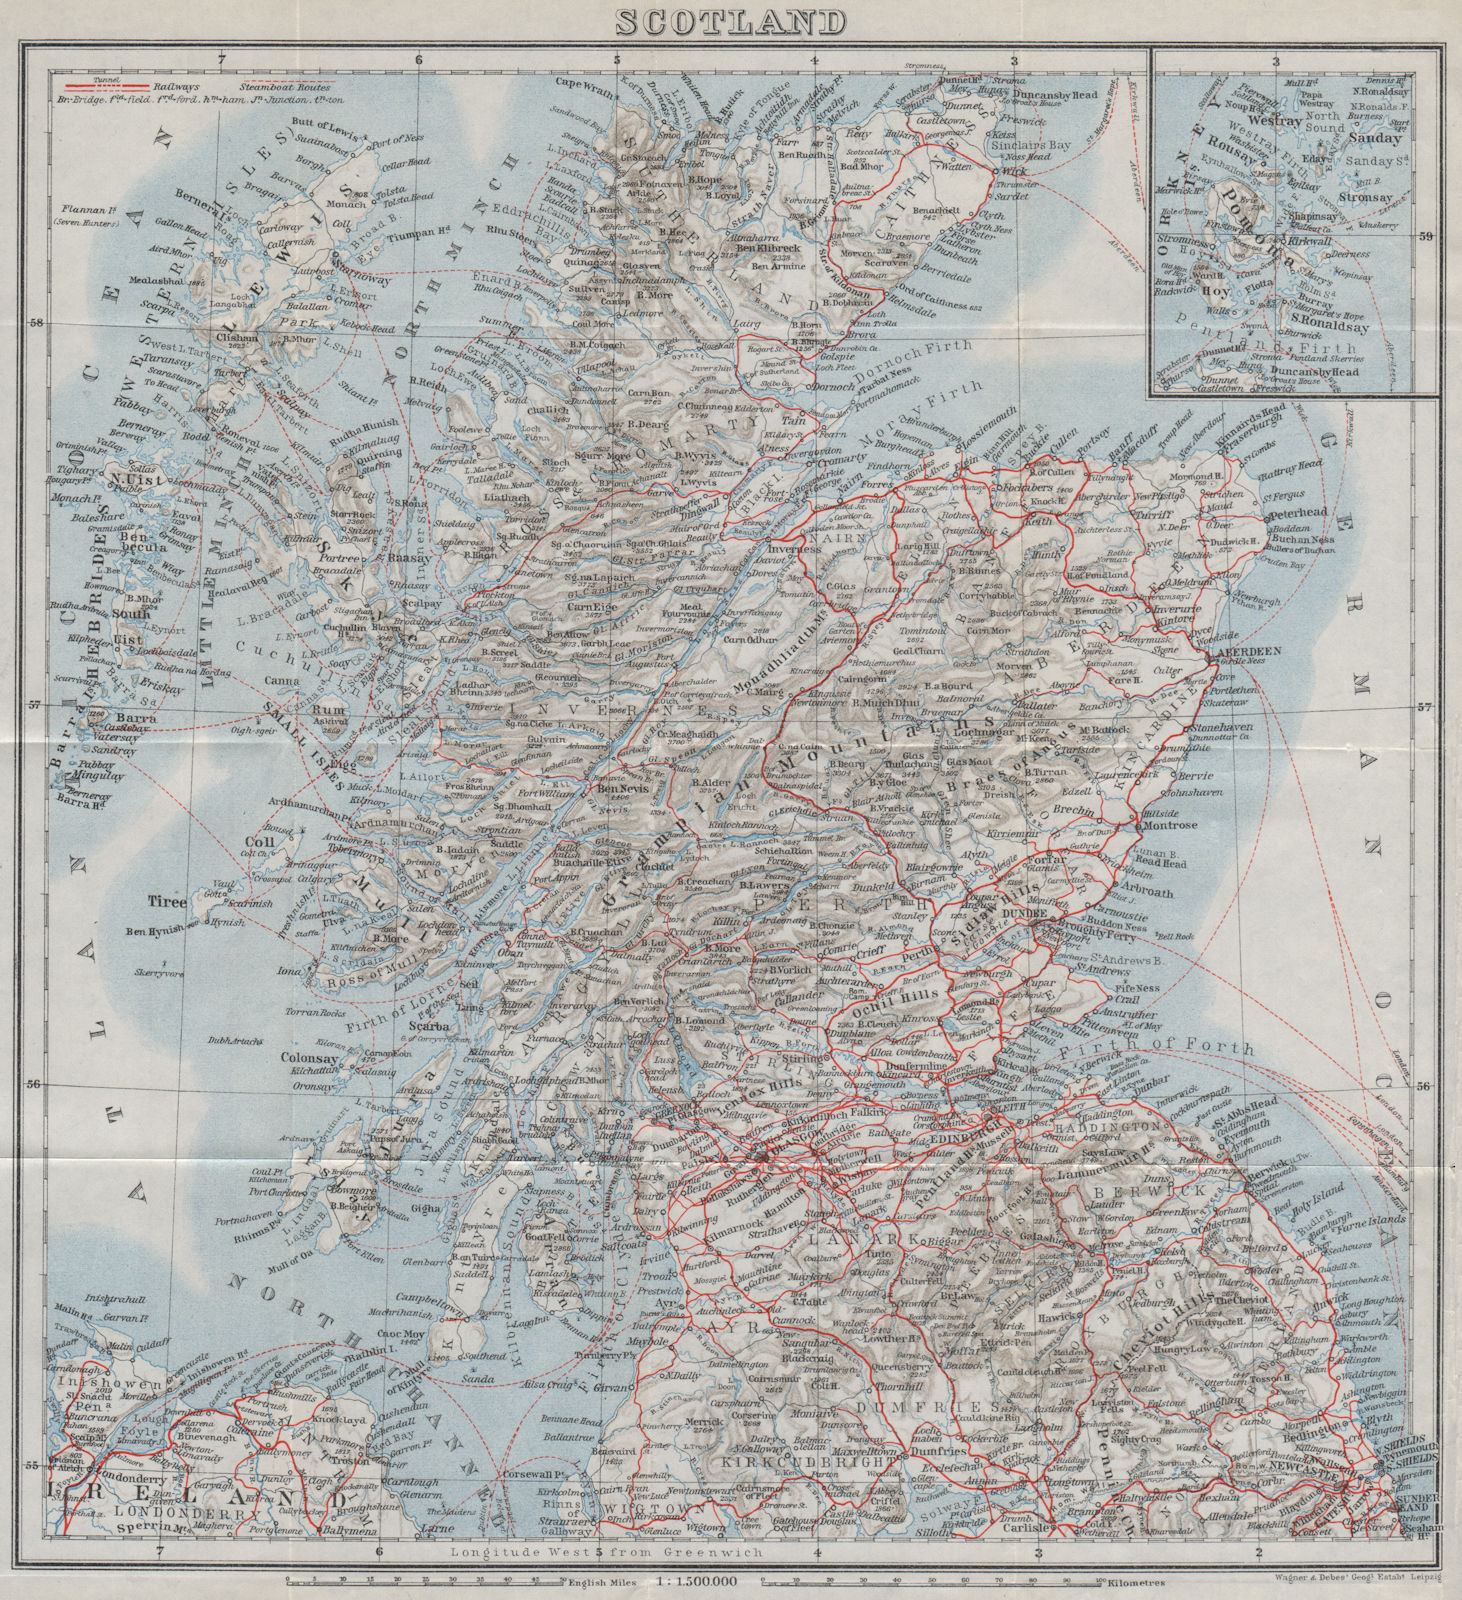 Associate Product RAILWAY MAP OF SCOTLAND. Steamboat steamship routes. BAEDEKER 1927 old